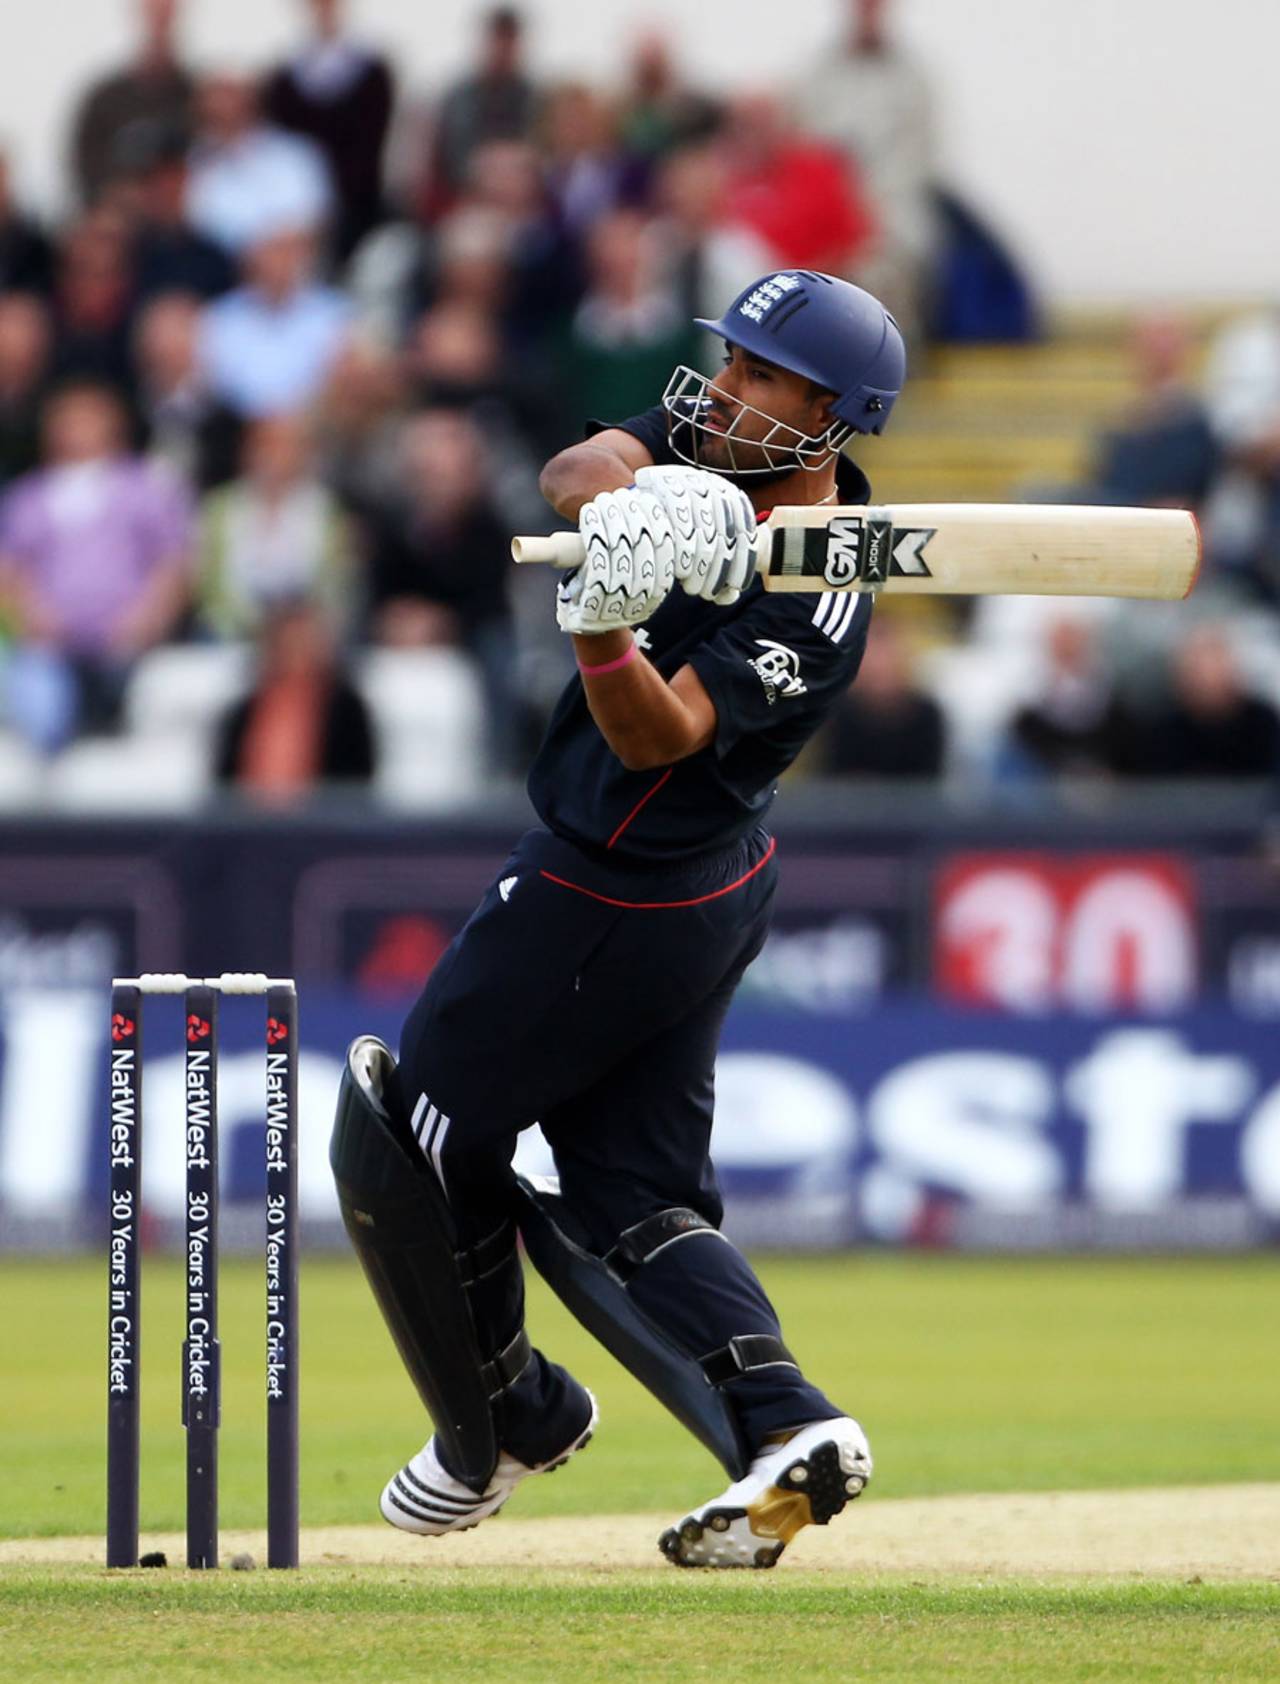 Ravi Bopara struck three sixes in an unbeaten 35 to finish England's innings in style, England v Pakistan, 1st ODI, Chester-le-Street, September 10 2010 